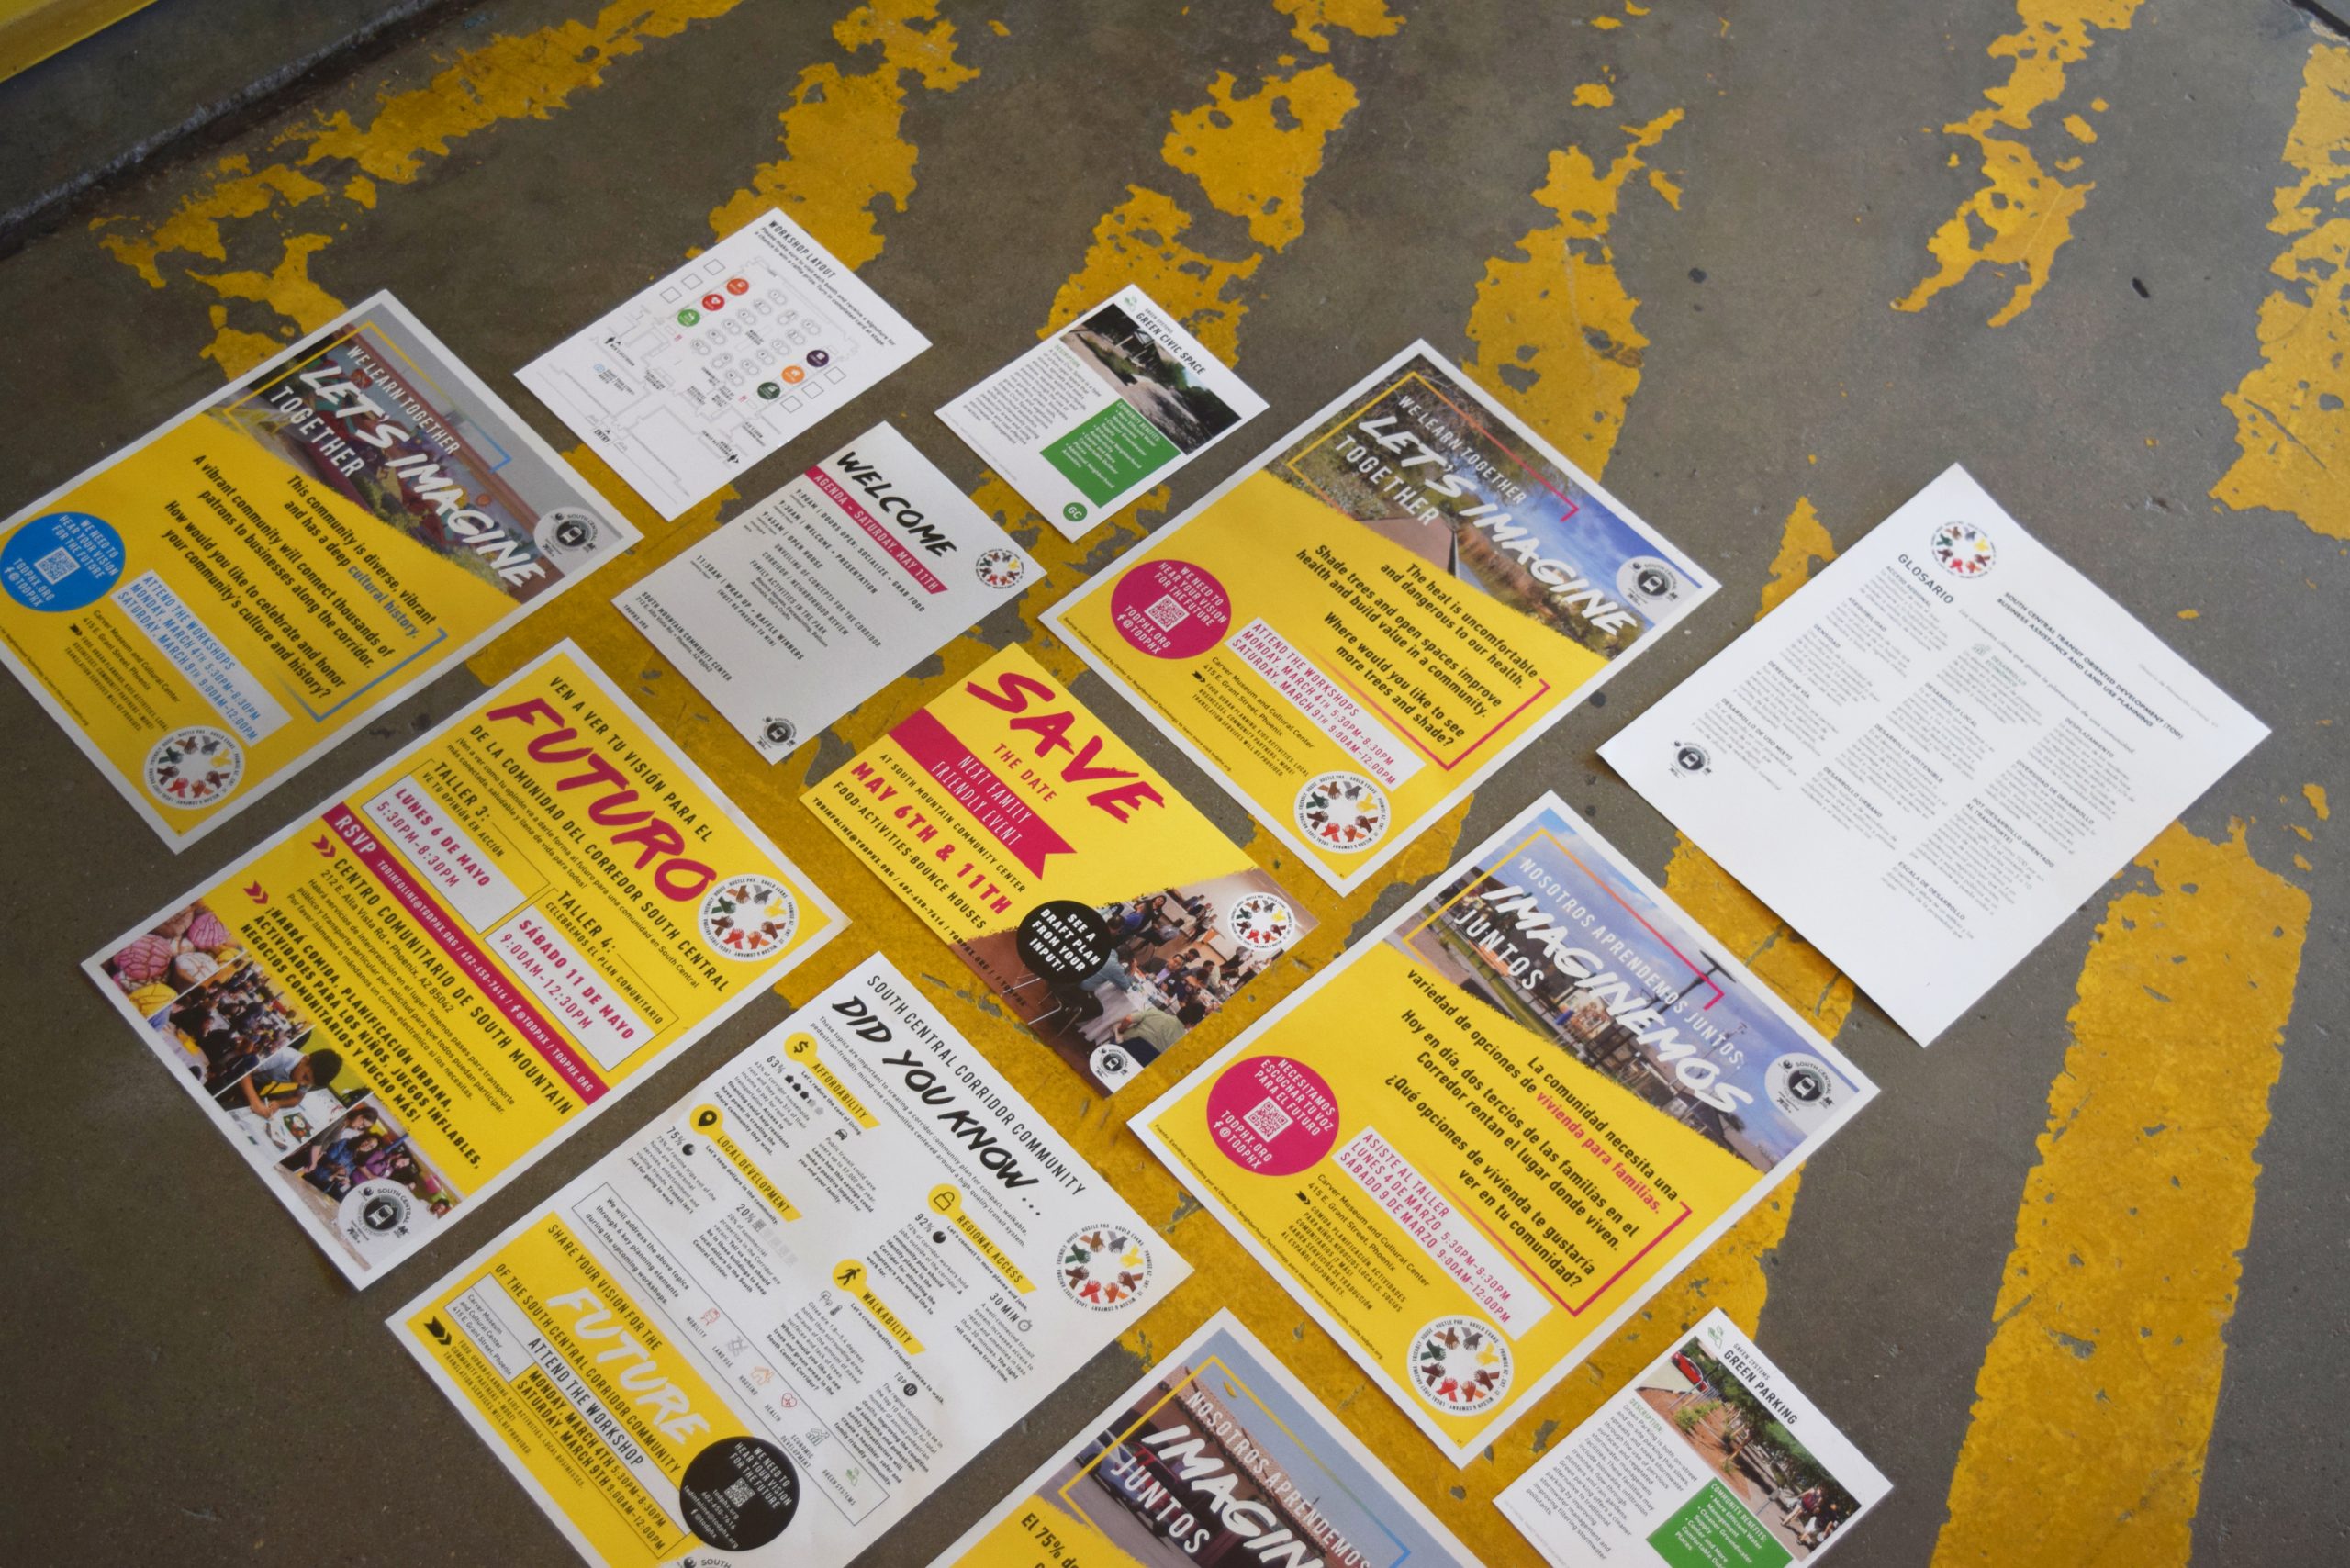 A broad coalition of community organizations worked to design extensive multilingual educational and outreach resources distributed through various advertisements, events, and digital and printed platforms to inform as well as engage the community. The image shows some of the printed collateral.